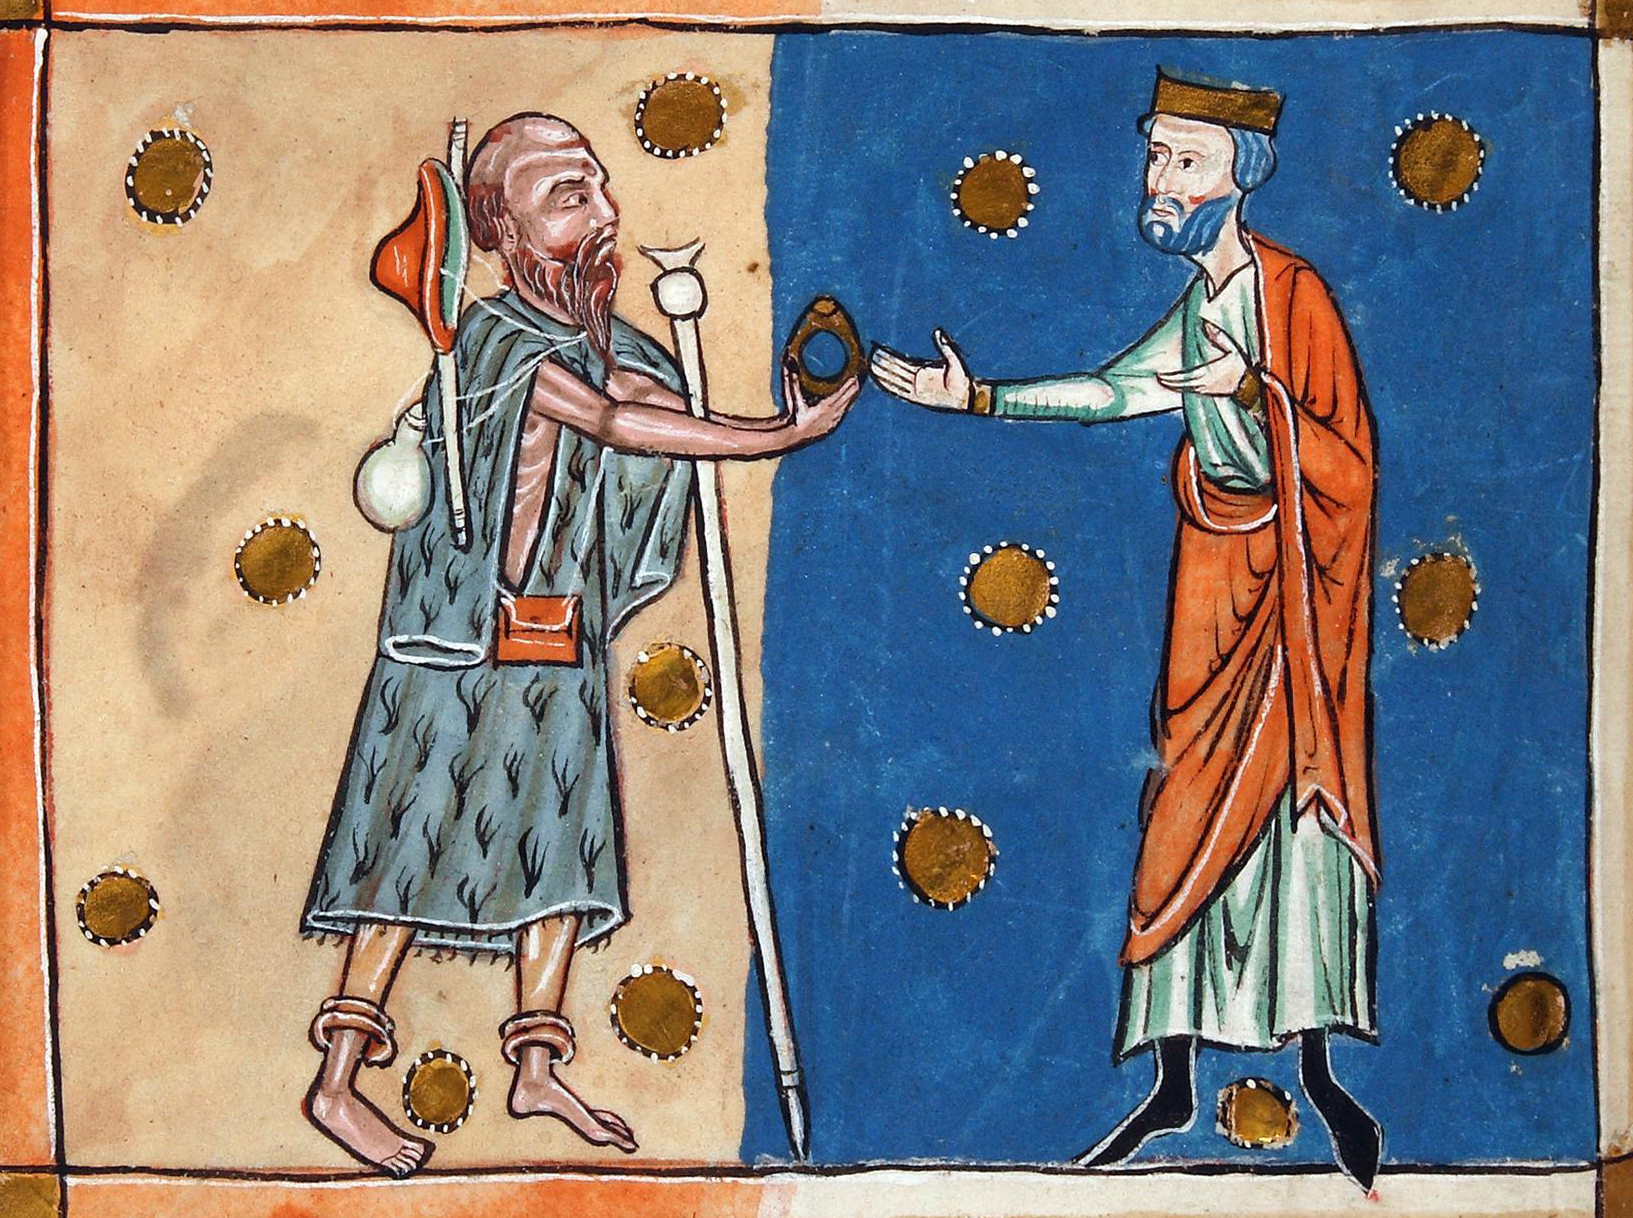 Edward the Confessor stretching his hands towards a man dressed as a beggar who is holding a ring.